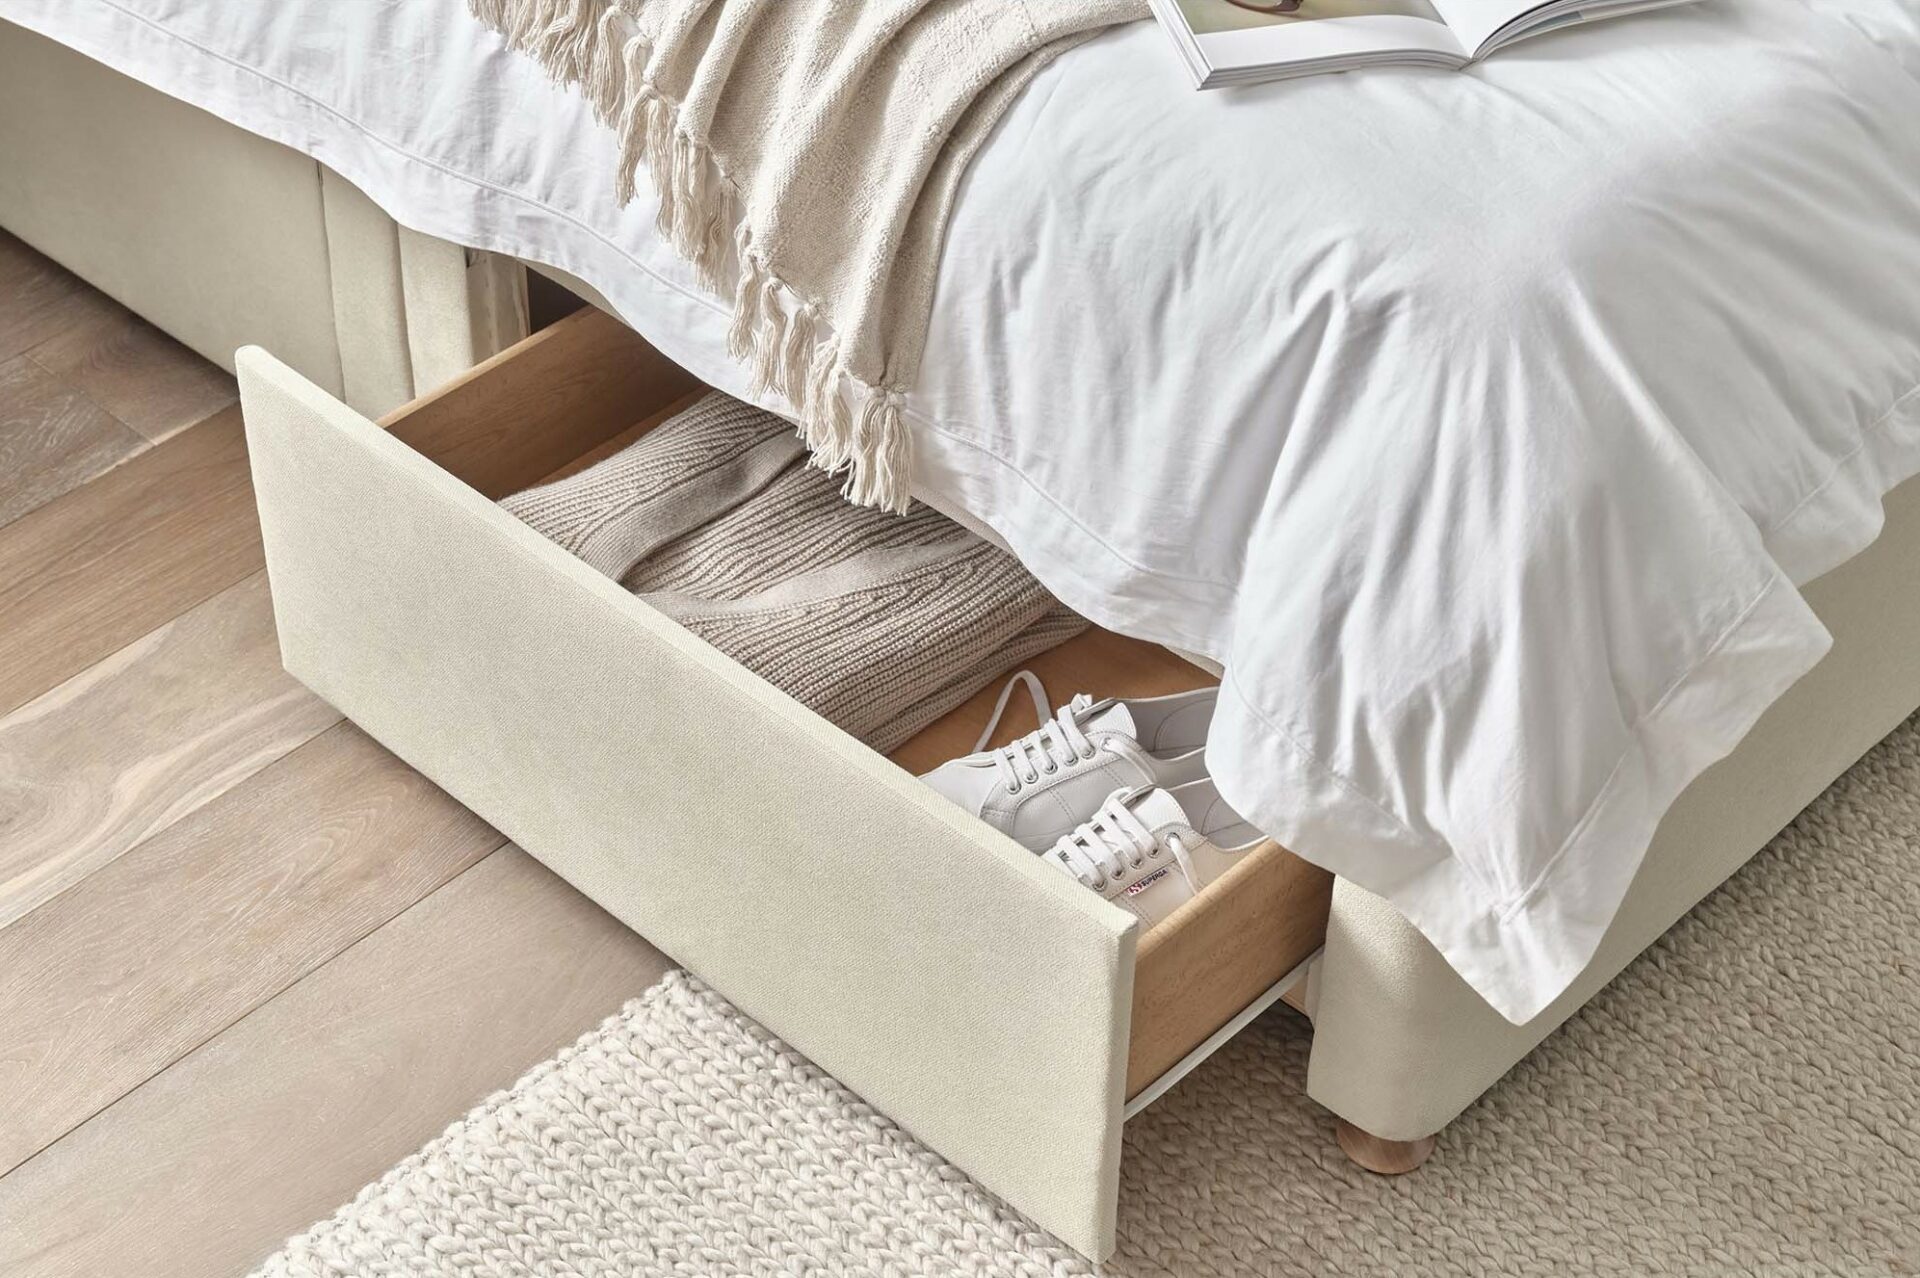 Oak Furnitureland Eden divan bed with drawer storage that's open to reveal clothes and shoes.